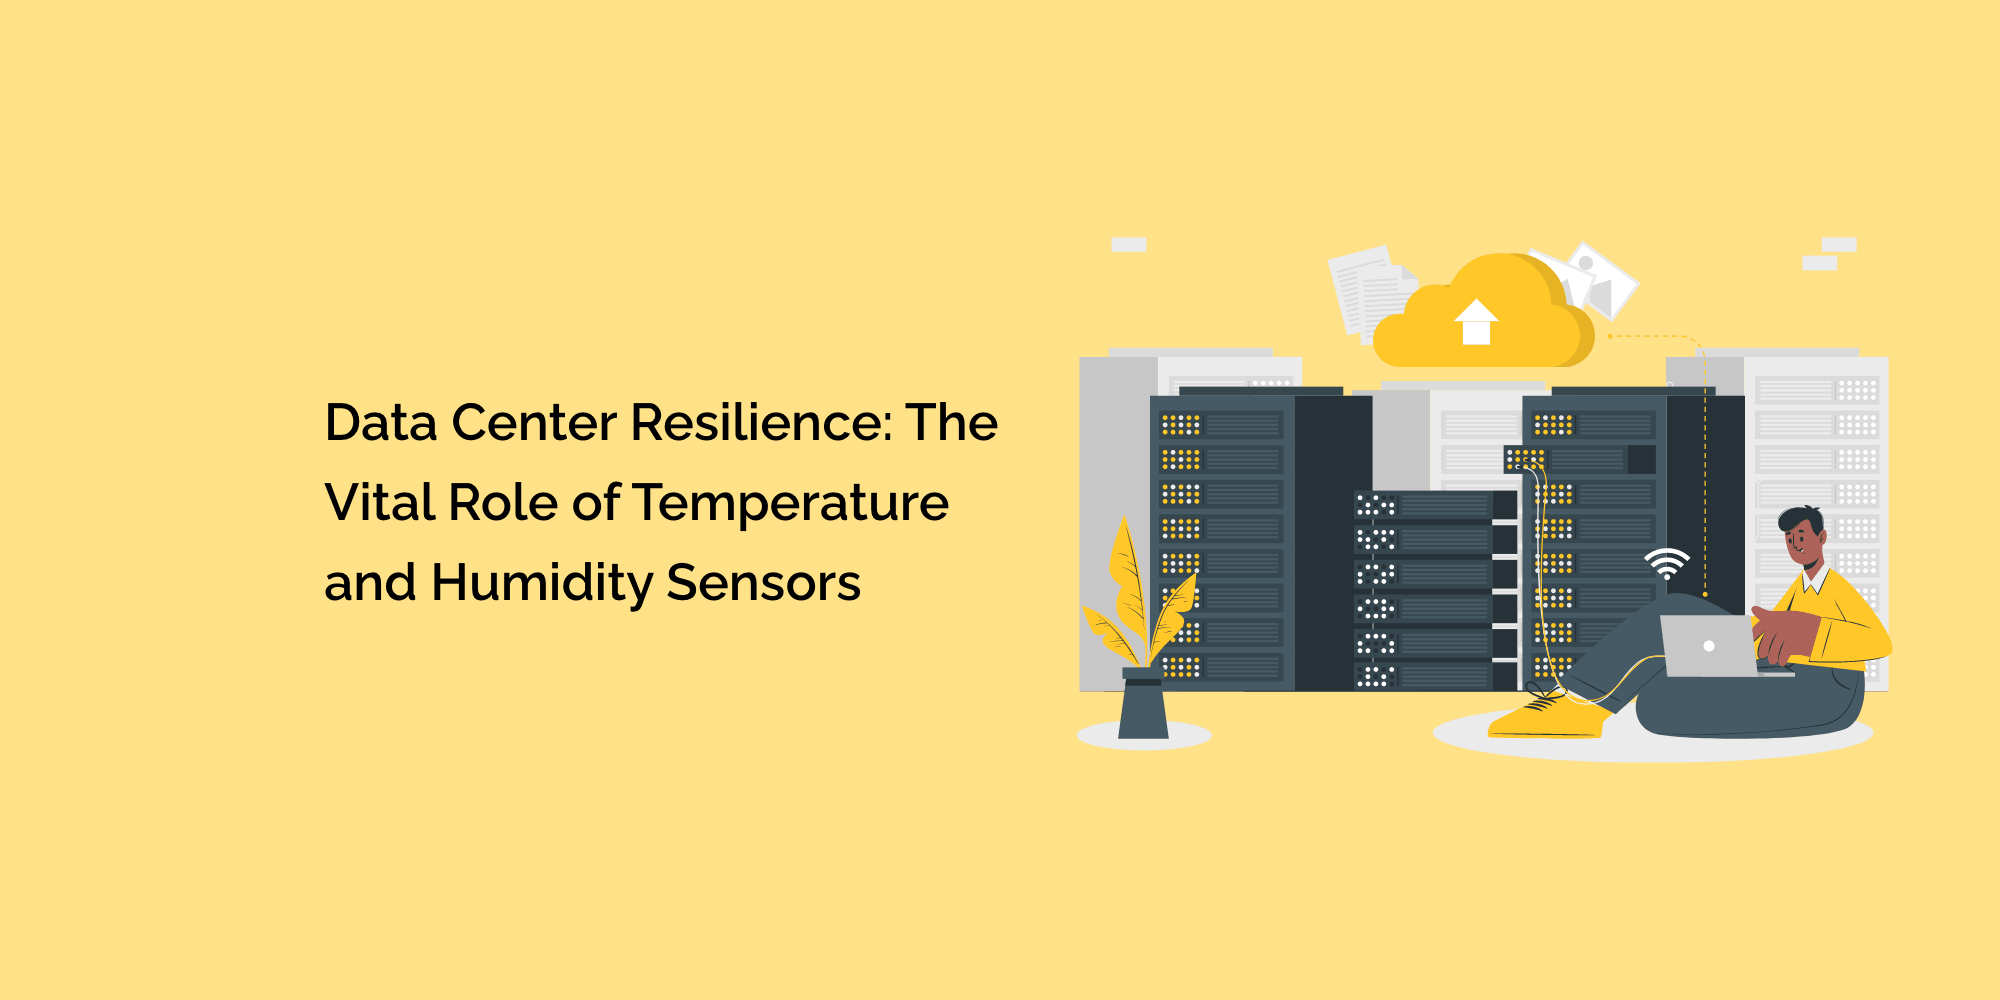 Data Center Resilience: The Vital Role of Temperature and Humidity Sensors